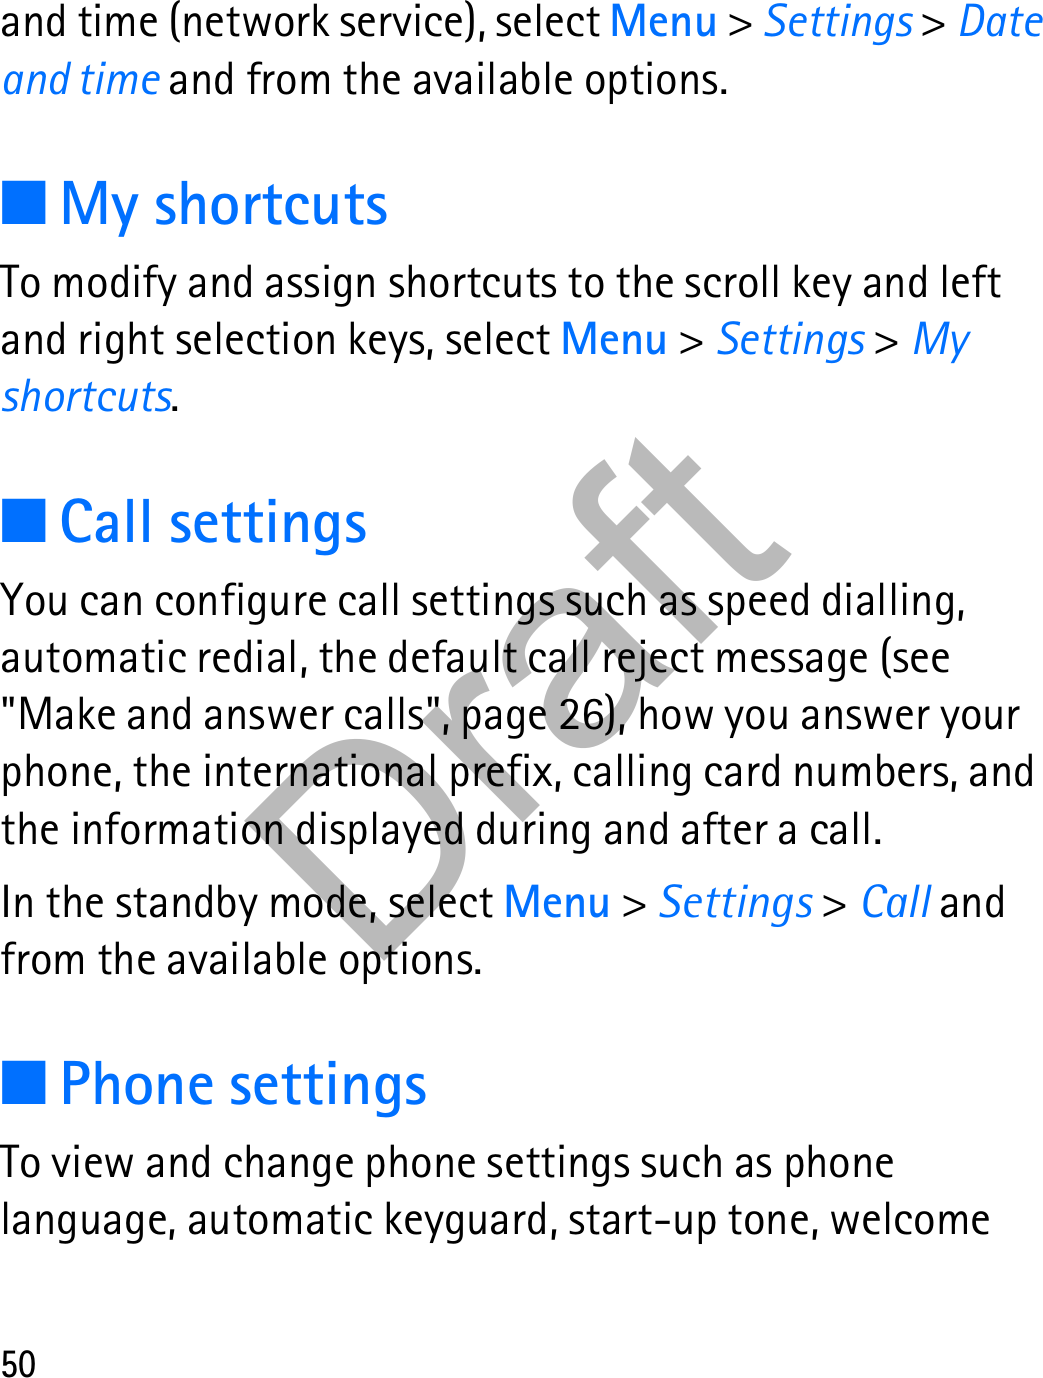 50and time (network service), select Menu &gt; Settings &gt; Date and time and from the available options.■My shortcutsTo modify and assign shortcuts to the scroll key and left and right selection keys, select Menu &gt; Settings &gt; My shortcuts.■Call settingsYou can configure call settings such as speed dialling, automatic redial, the default call reject message (see &quot;Make and answer calls&quot;, page 26), how you answer your phone, the international prefix, calling card numbers, and the information displayed during and after a call.In the standby mode, select Menu &gt; Settings &gt; Call and from the available options.■Phone settingsTo view and change phone settings such as phone language, automatic keyguard, start-up tone, welcome Draft